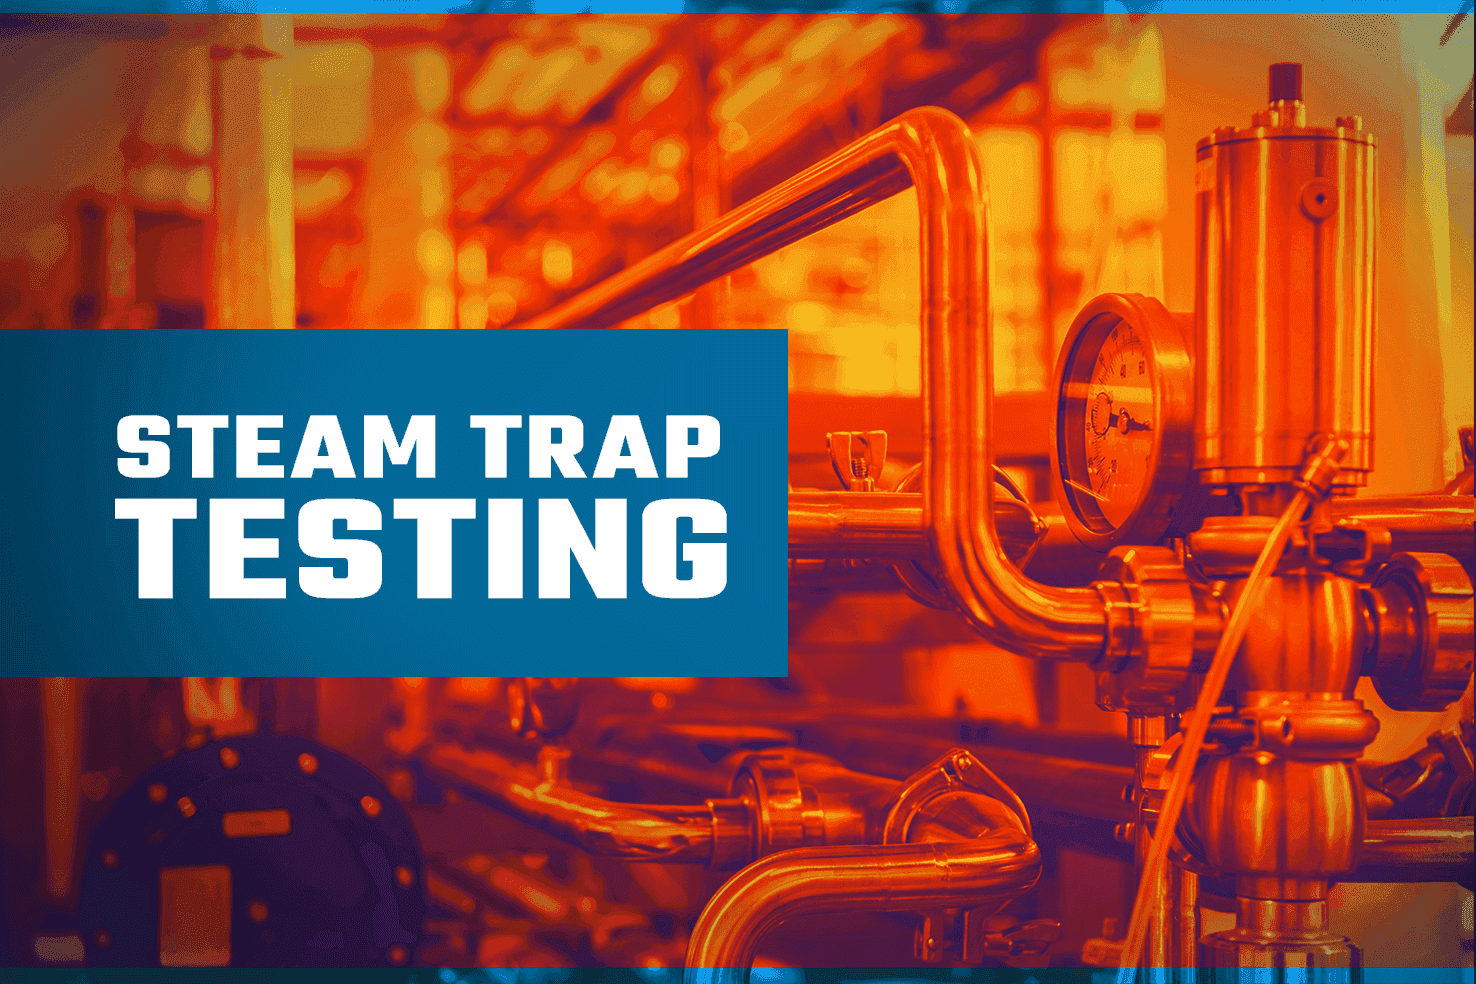 Steam Trap Testing with Infrared and Ultrasound Devices